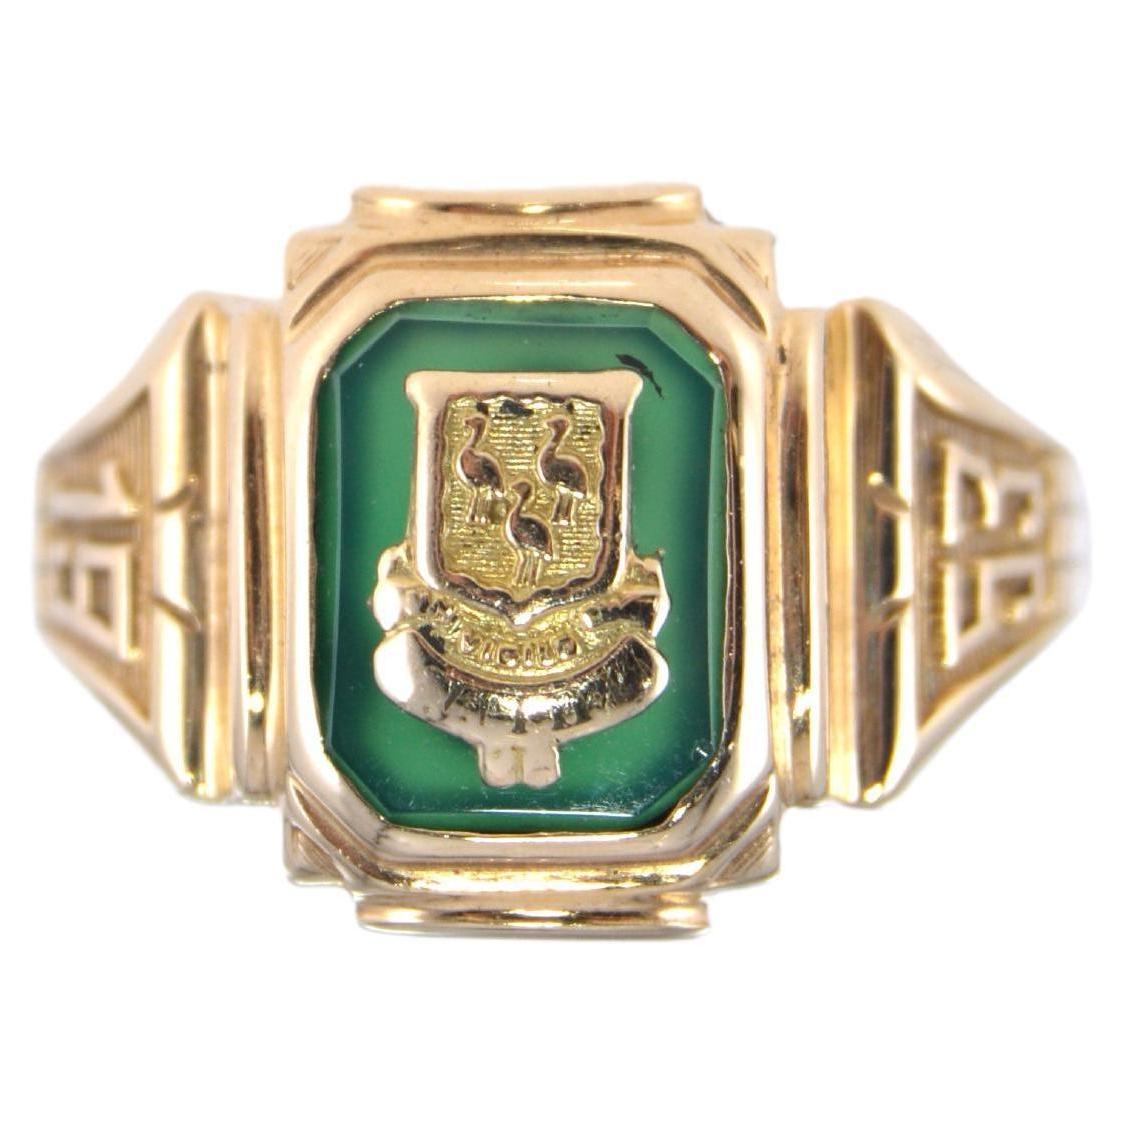 Unisex Art Deco Signet Ring in 10 Karat Solid Gold with Gold Inset from 1953 For Sale